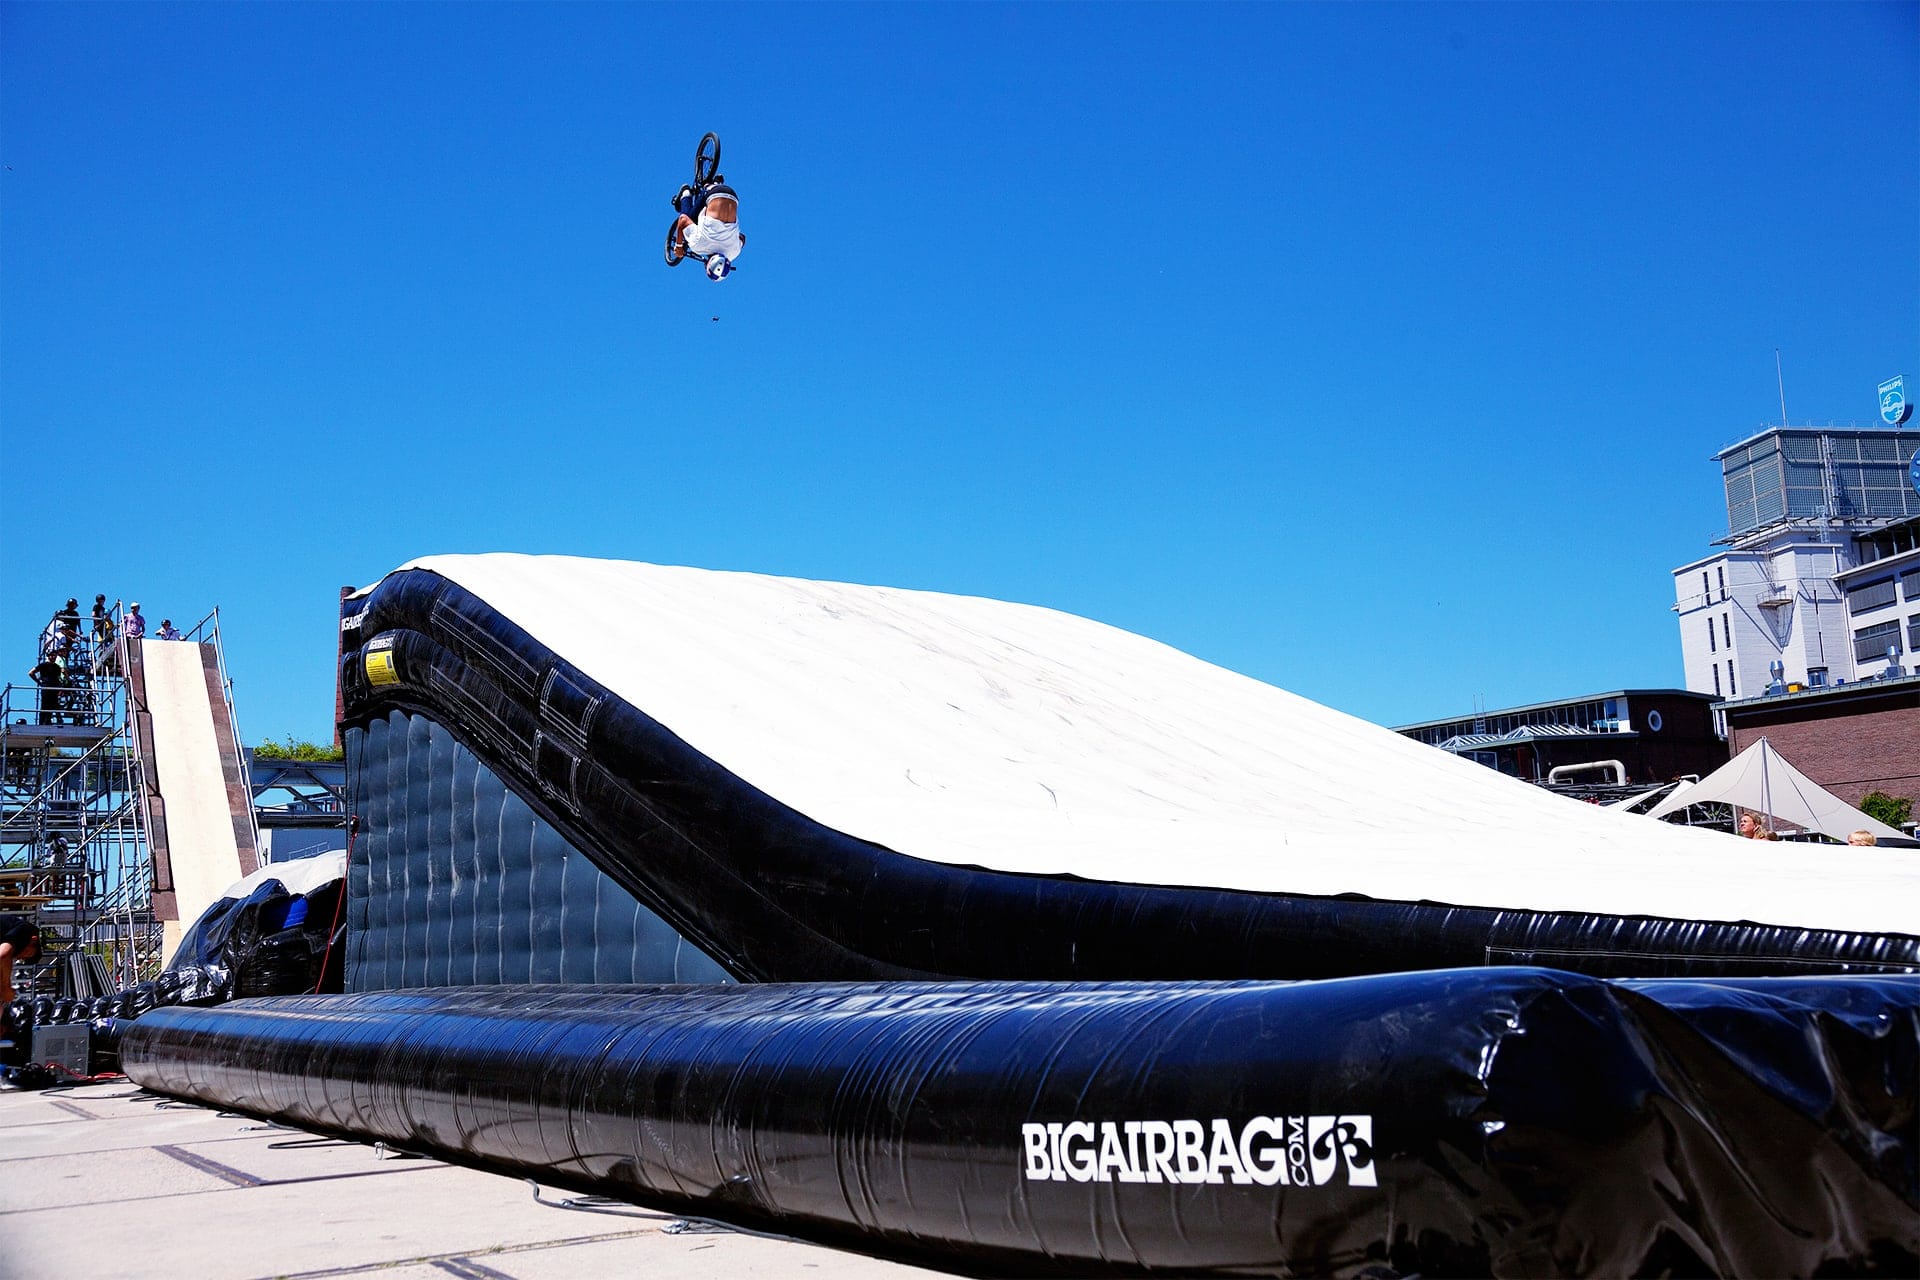 BAGJUMP Airbags for FMX - the safest & most durable solution